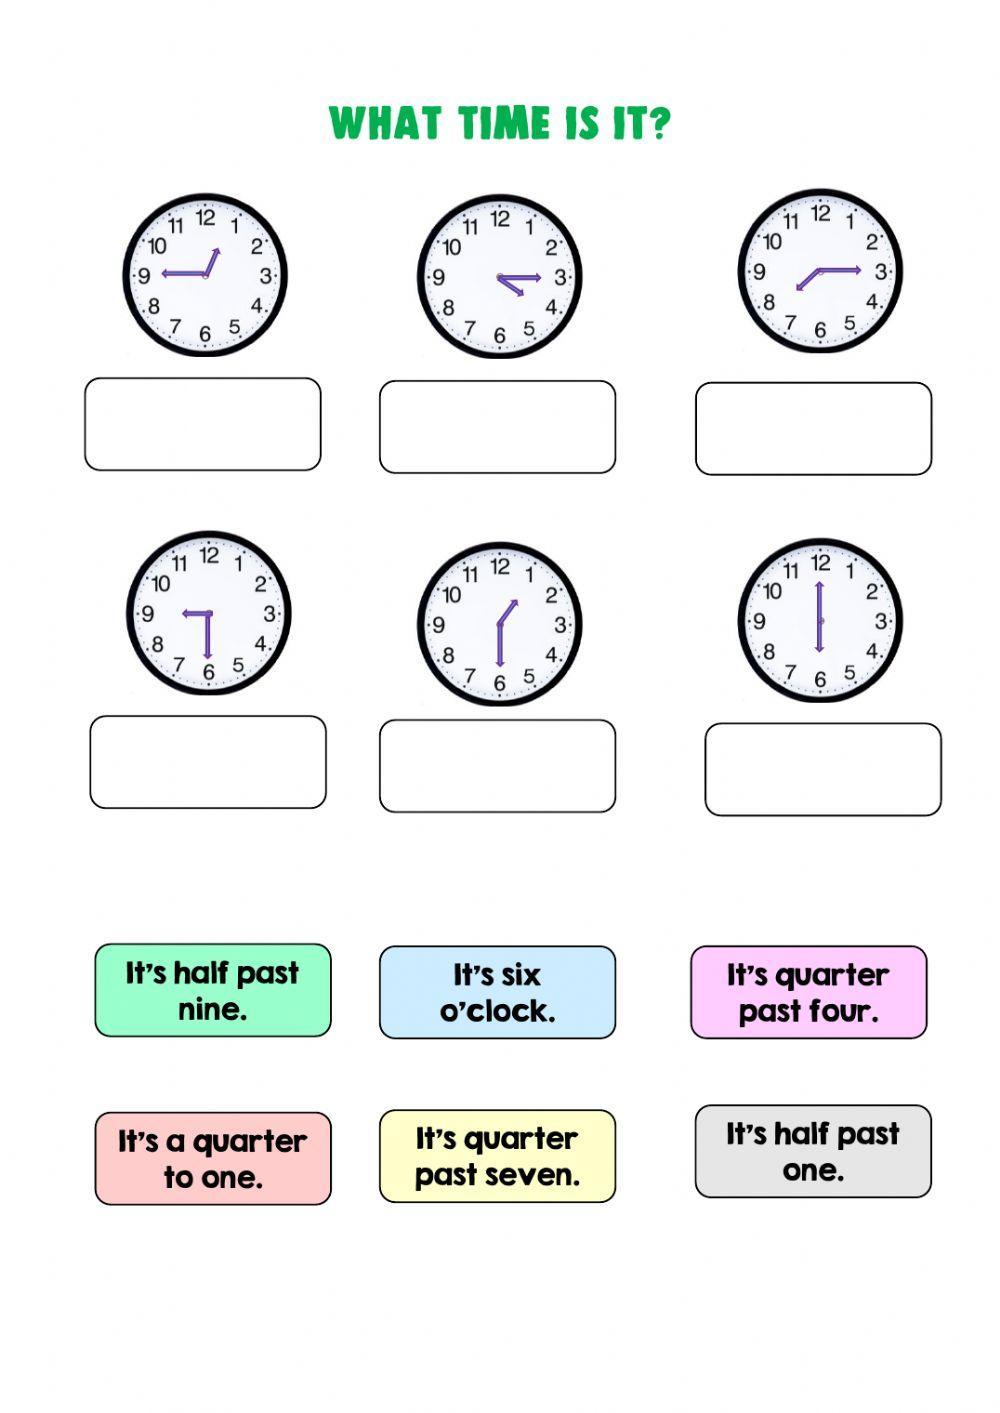 What time is it? online exercise for 4º-5º primaria | Live Worksheets